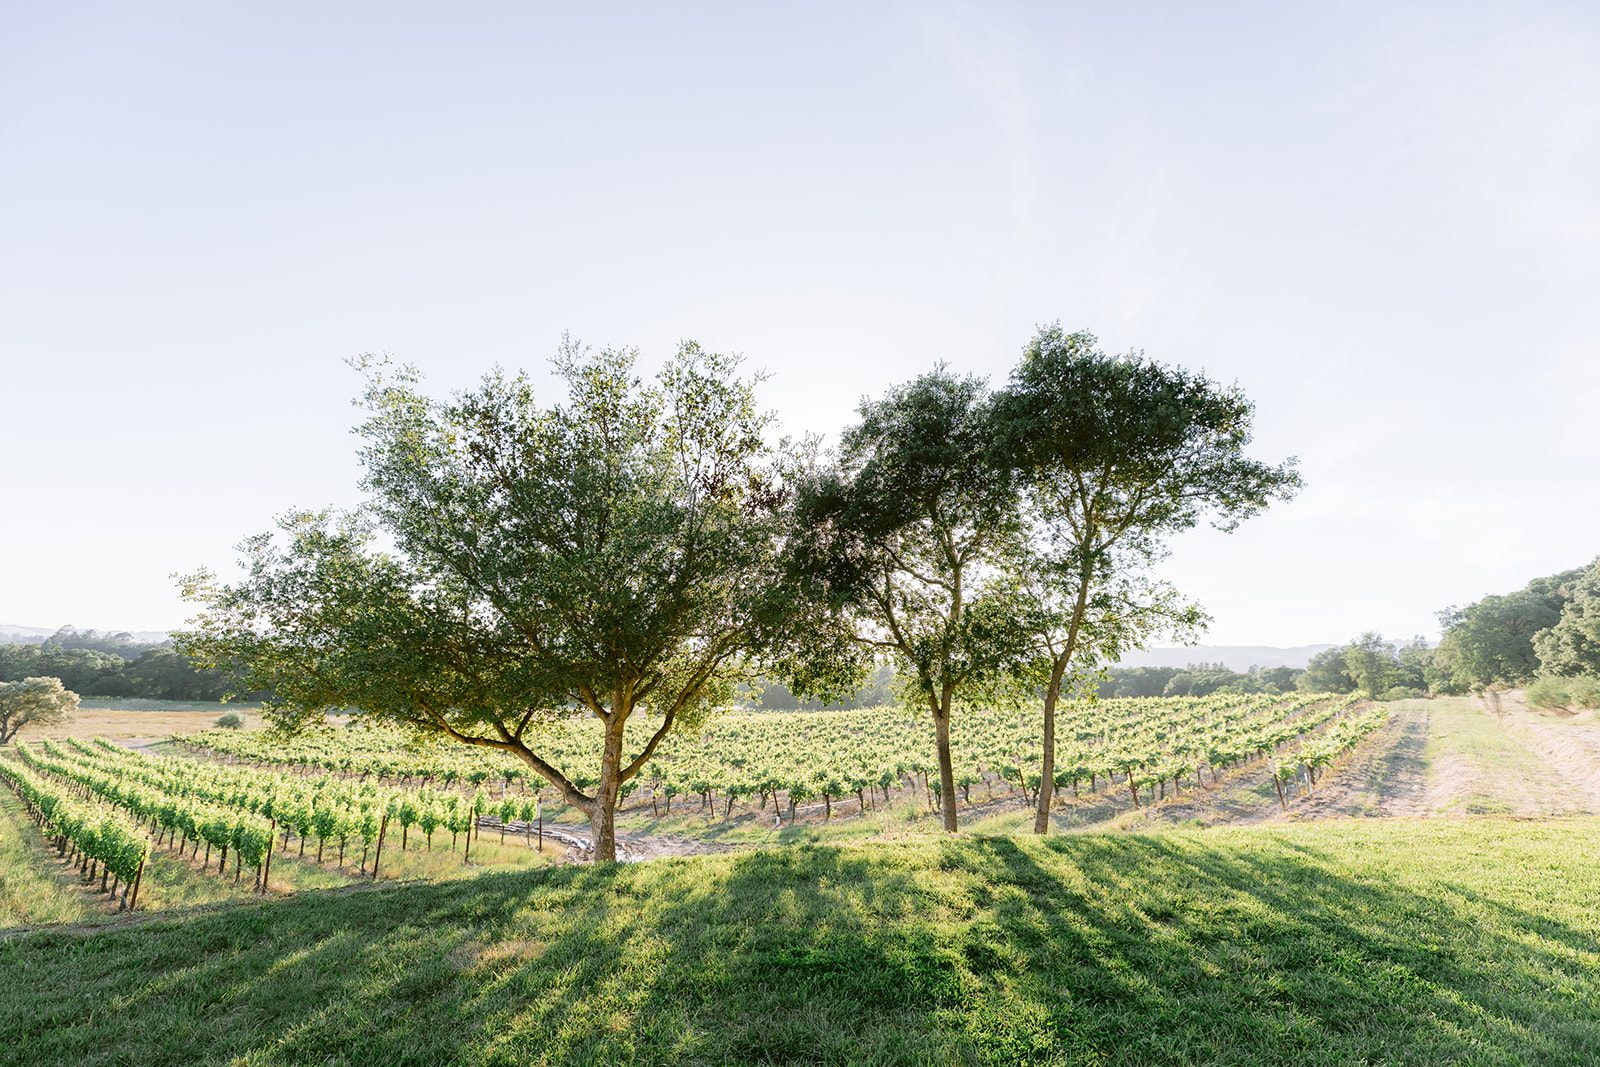 A vineyard field with trees in the background.